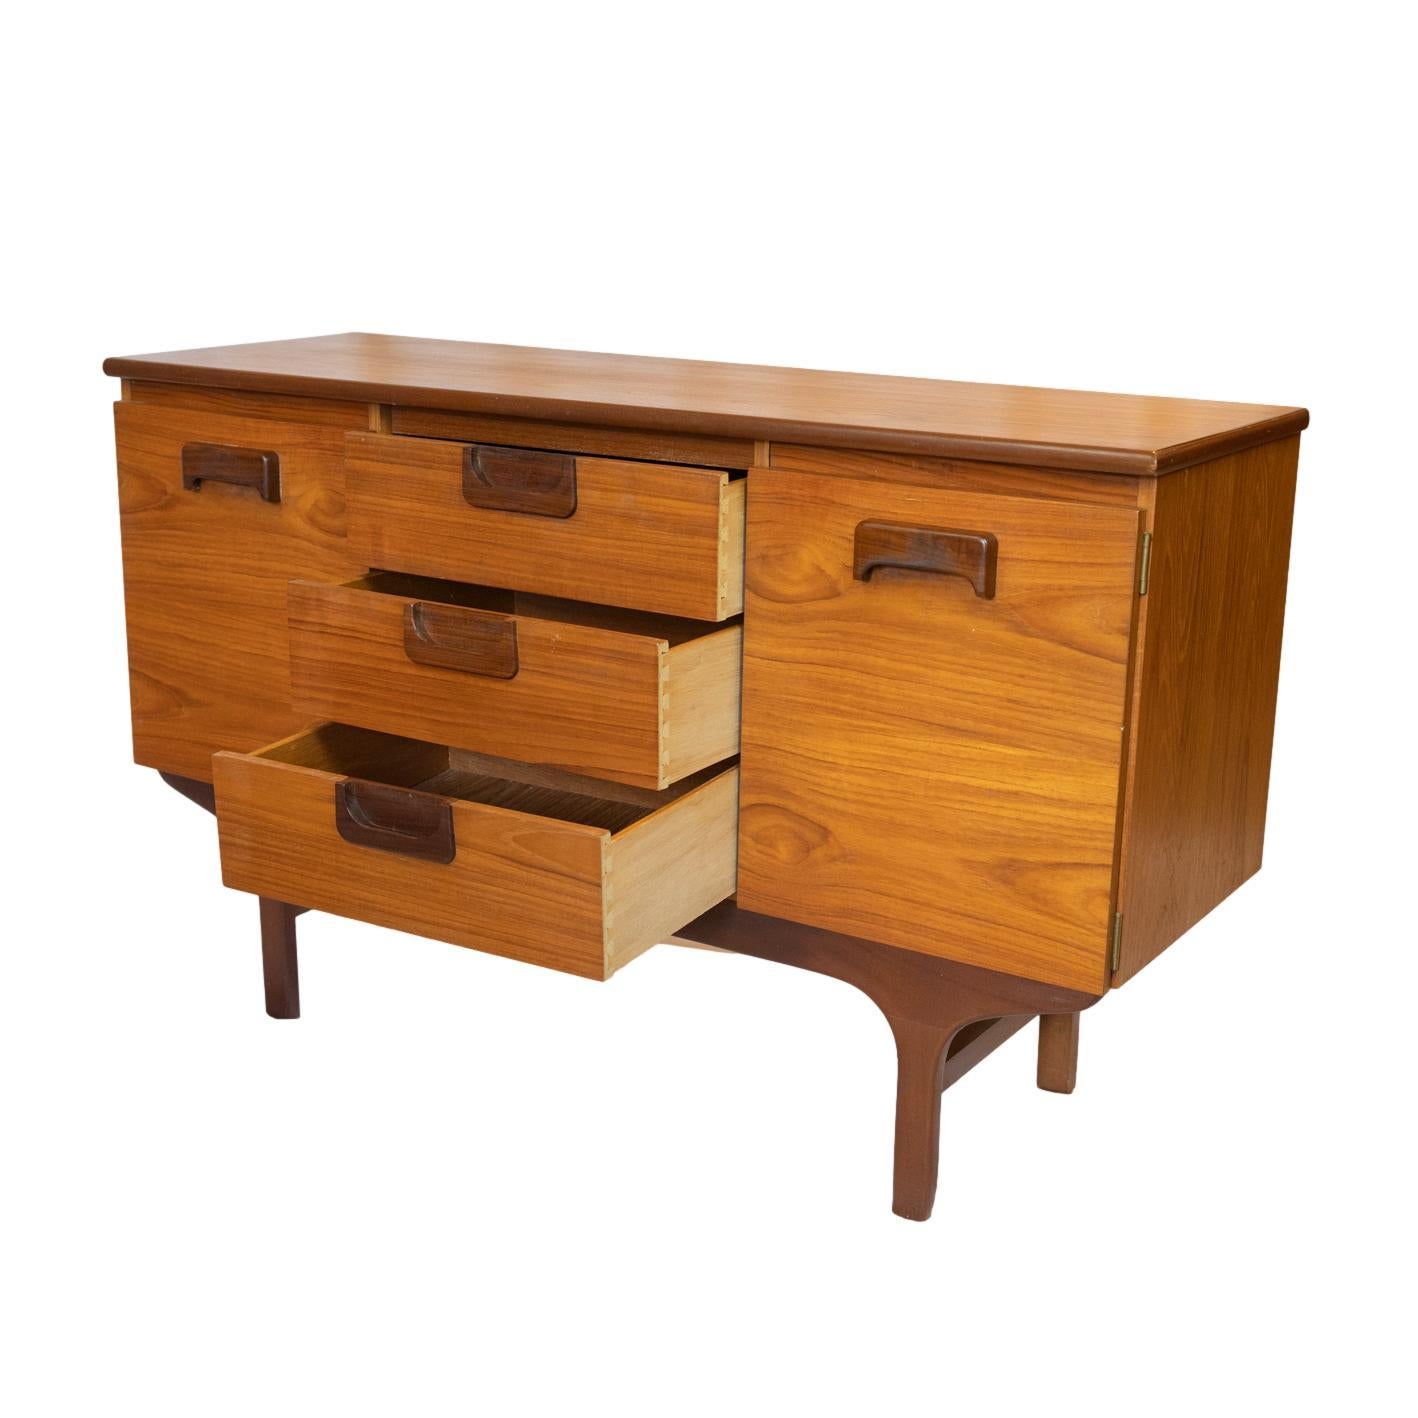 Mid-Century Modern Teak Sideboard by G-Plan, English, circa 1965 In Good Condition For Sale In Banner Elk, NC